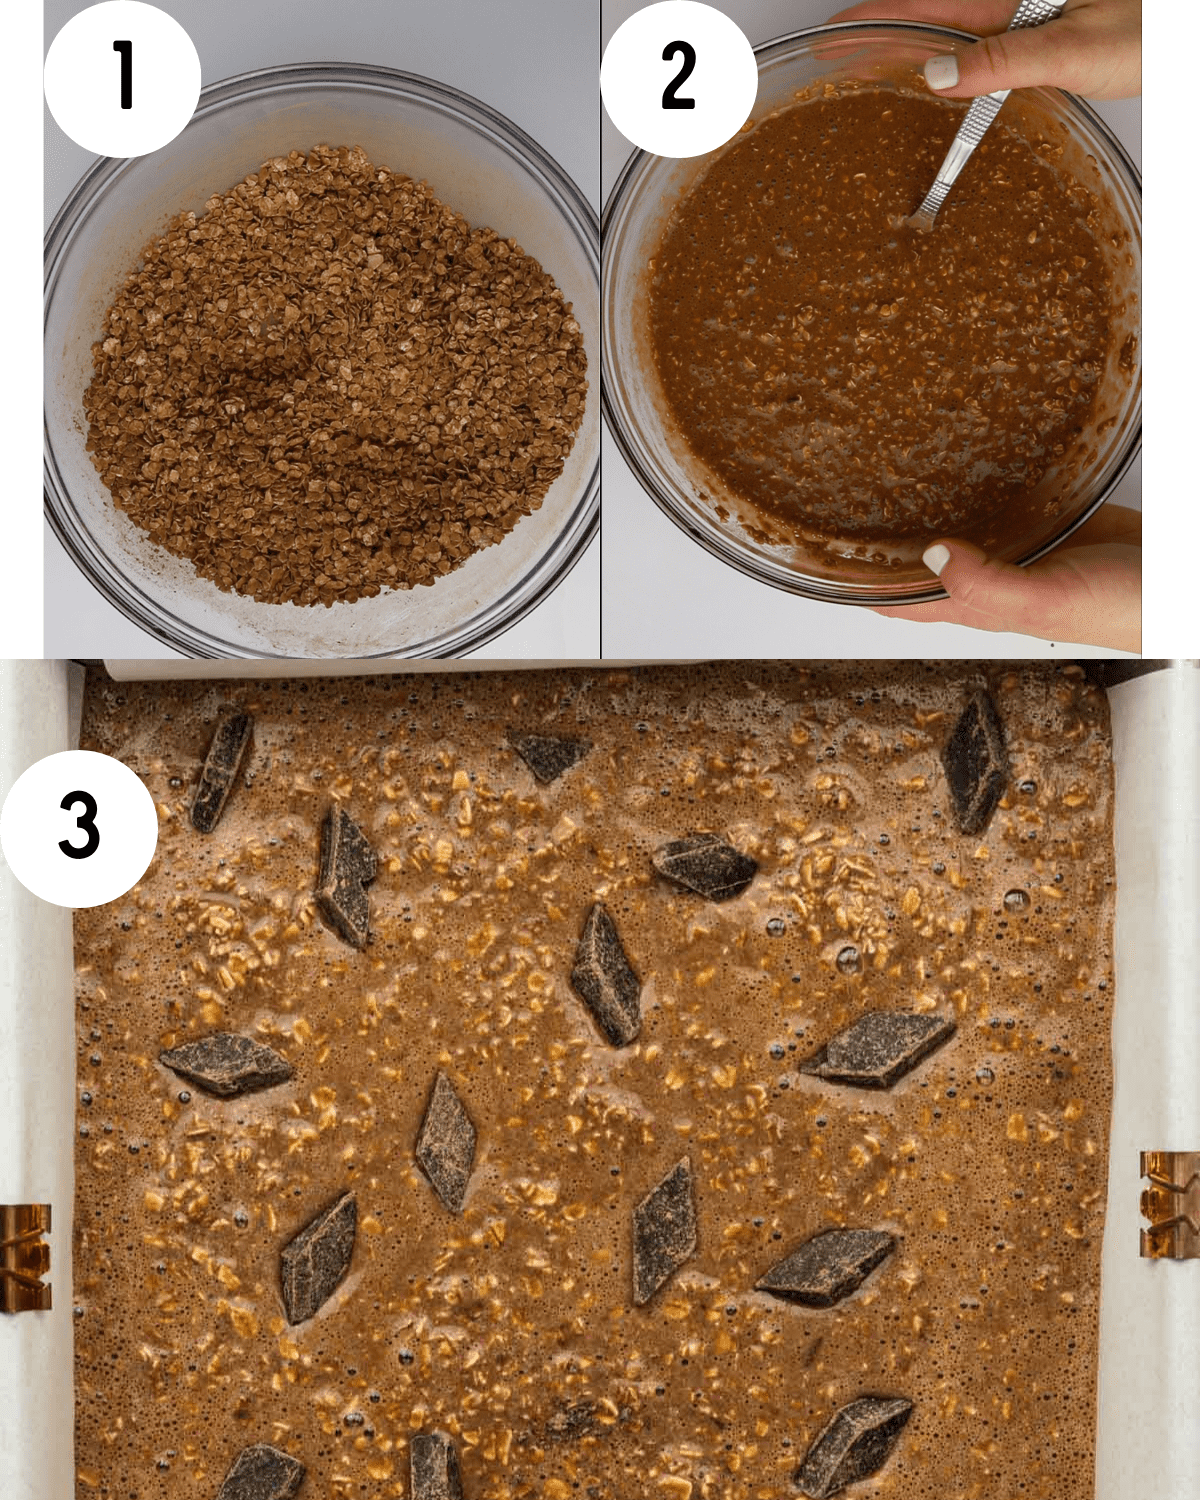 steps to make baked oats. dry ingredients in a clear bowl, all ingredients mixed together in a clear bowl, oats in a baking dish with chocolate chunks on top. 